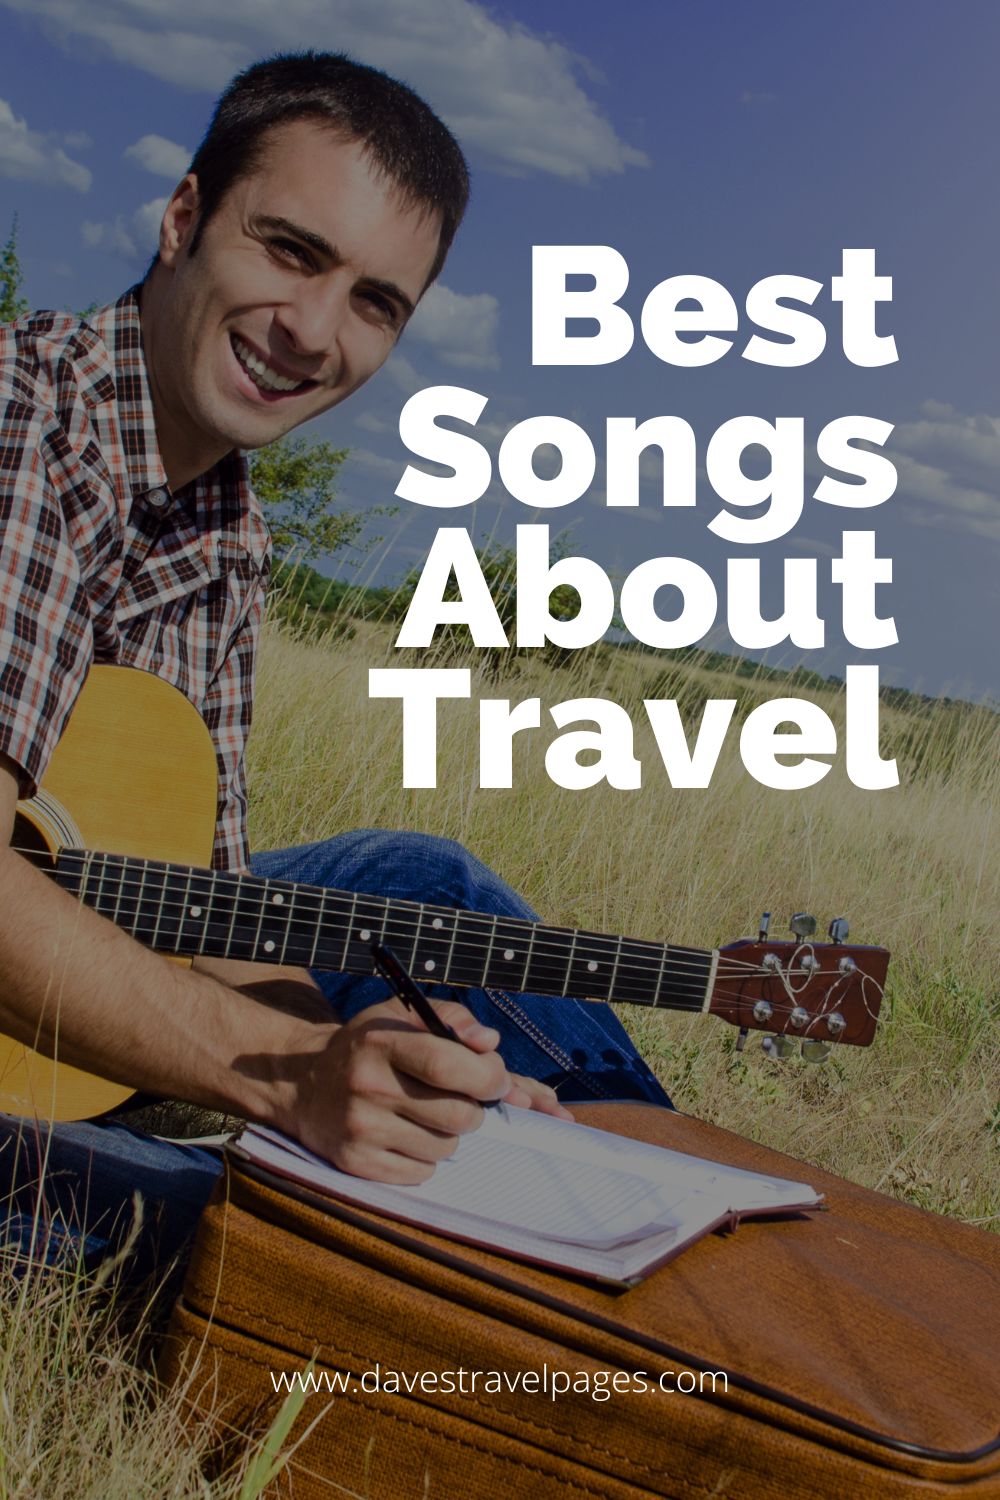 happy travel song download mp3